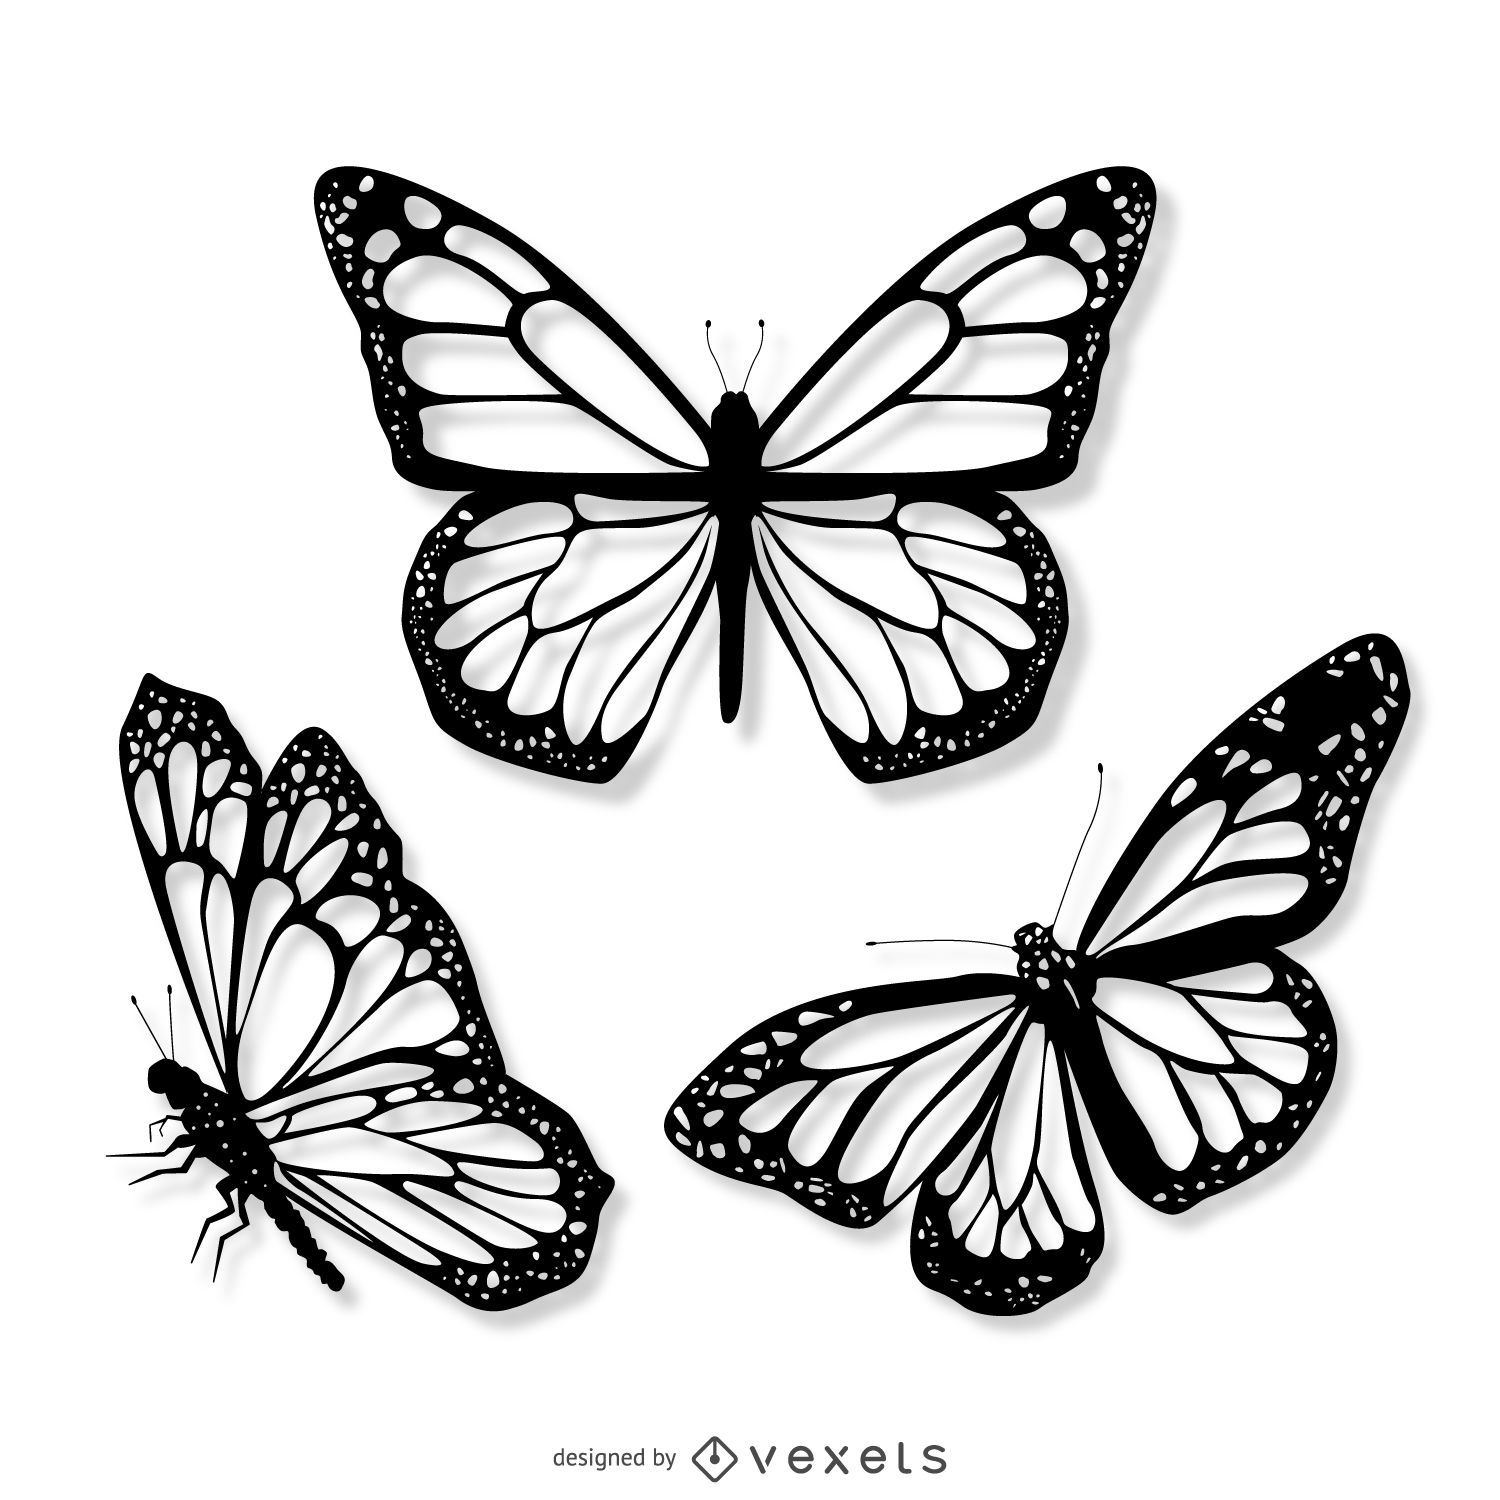 Butterfly Vector & Graphics to Download